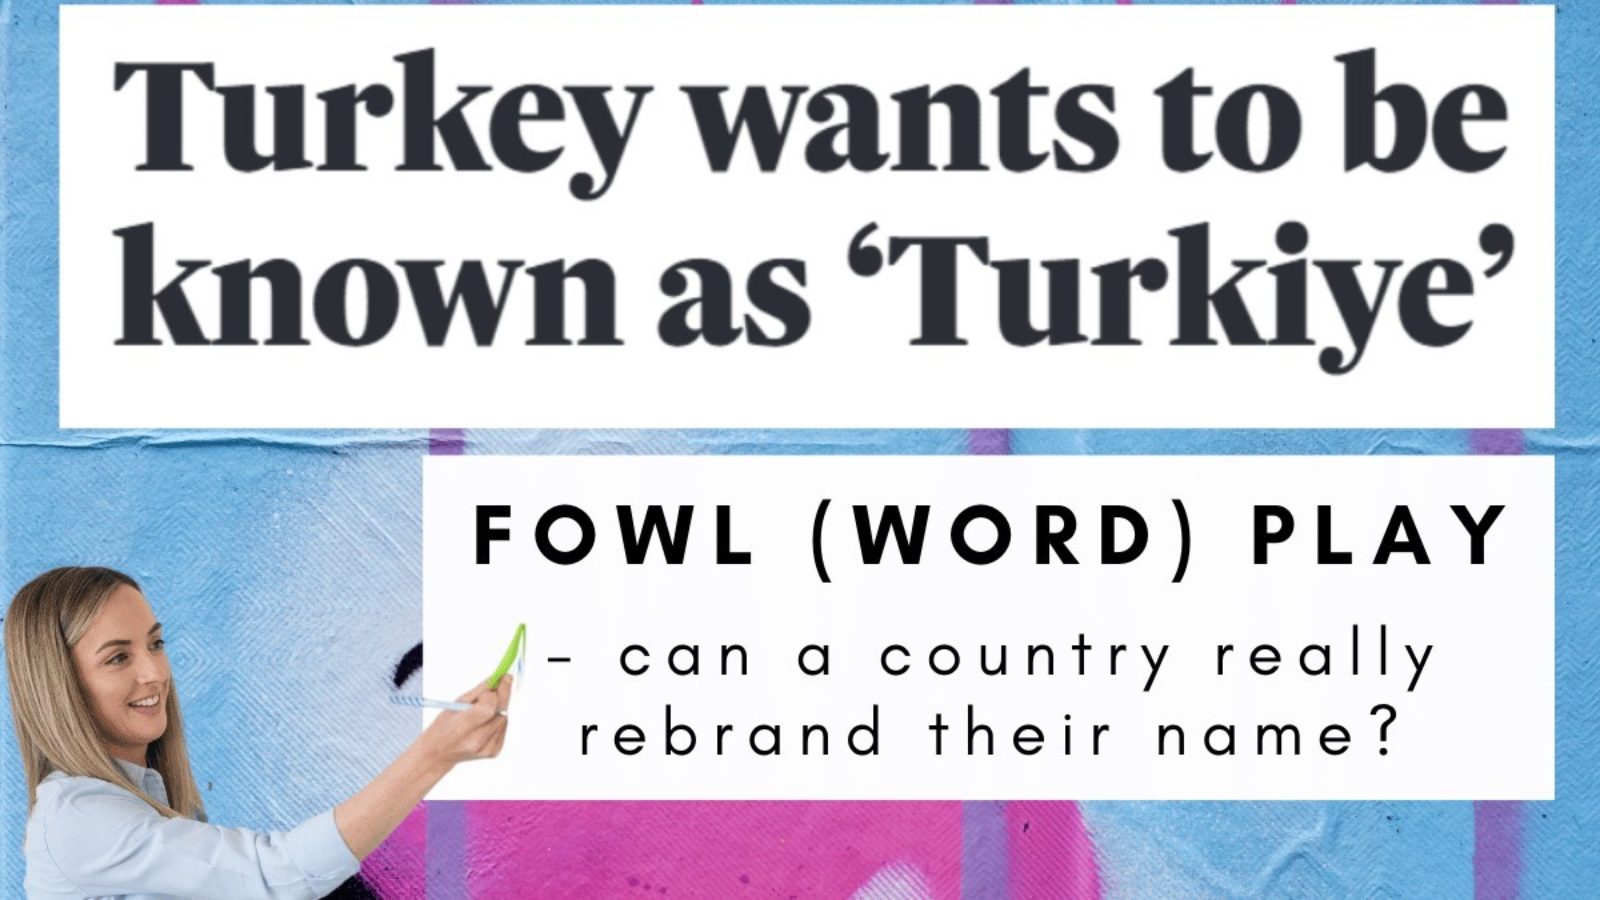 Fowl (word) play – can a country really rebrand their name?